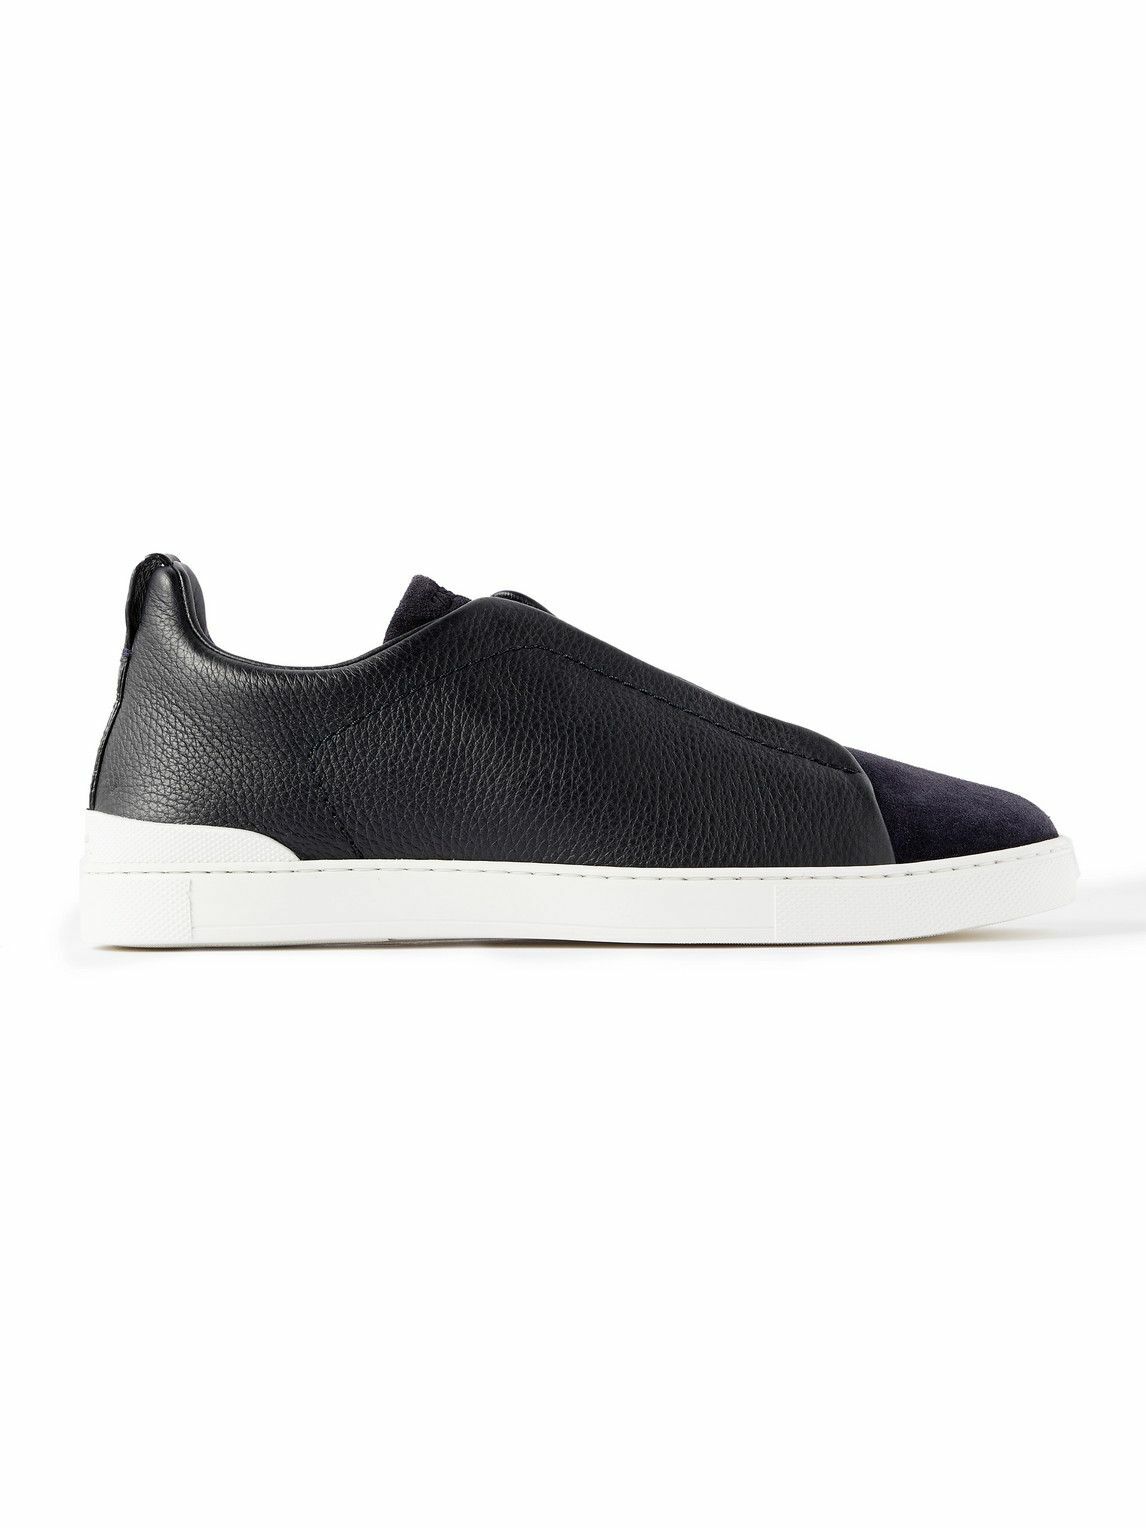 Zegna - Full-Grain Leather and Suede Slip-On Sneakers - Blue